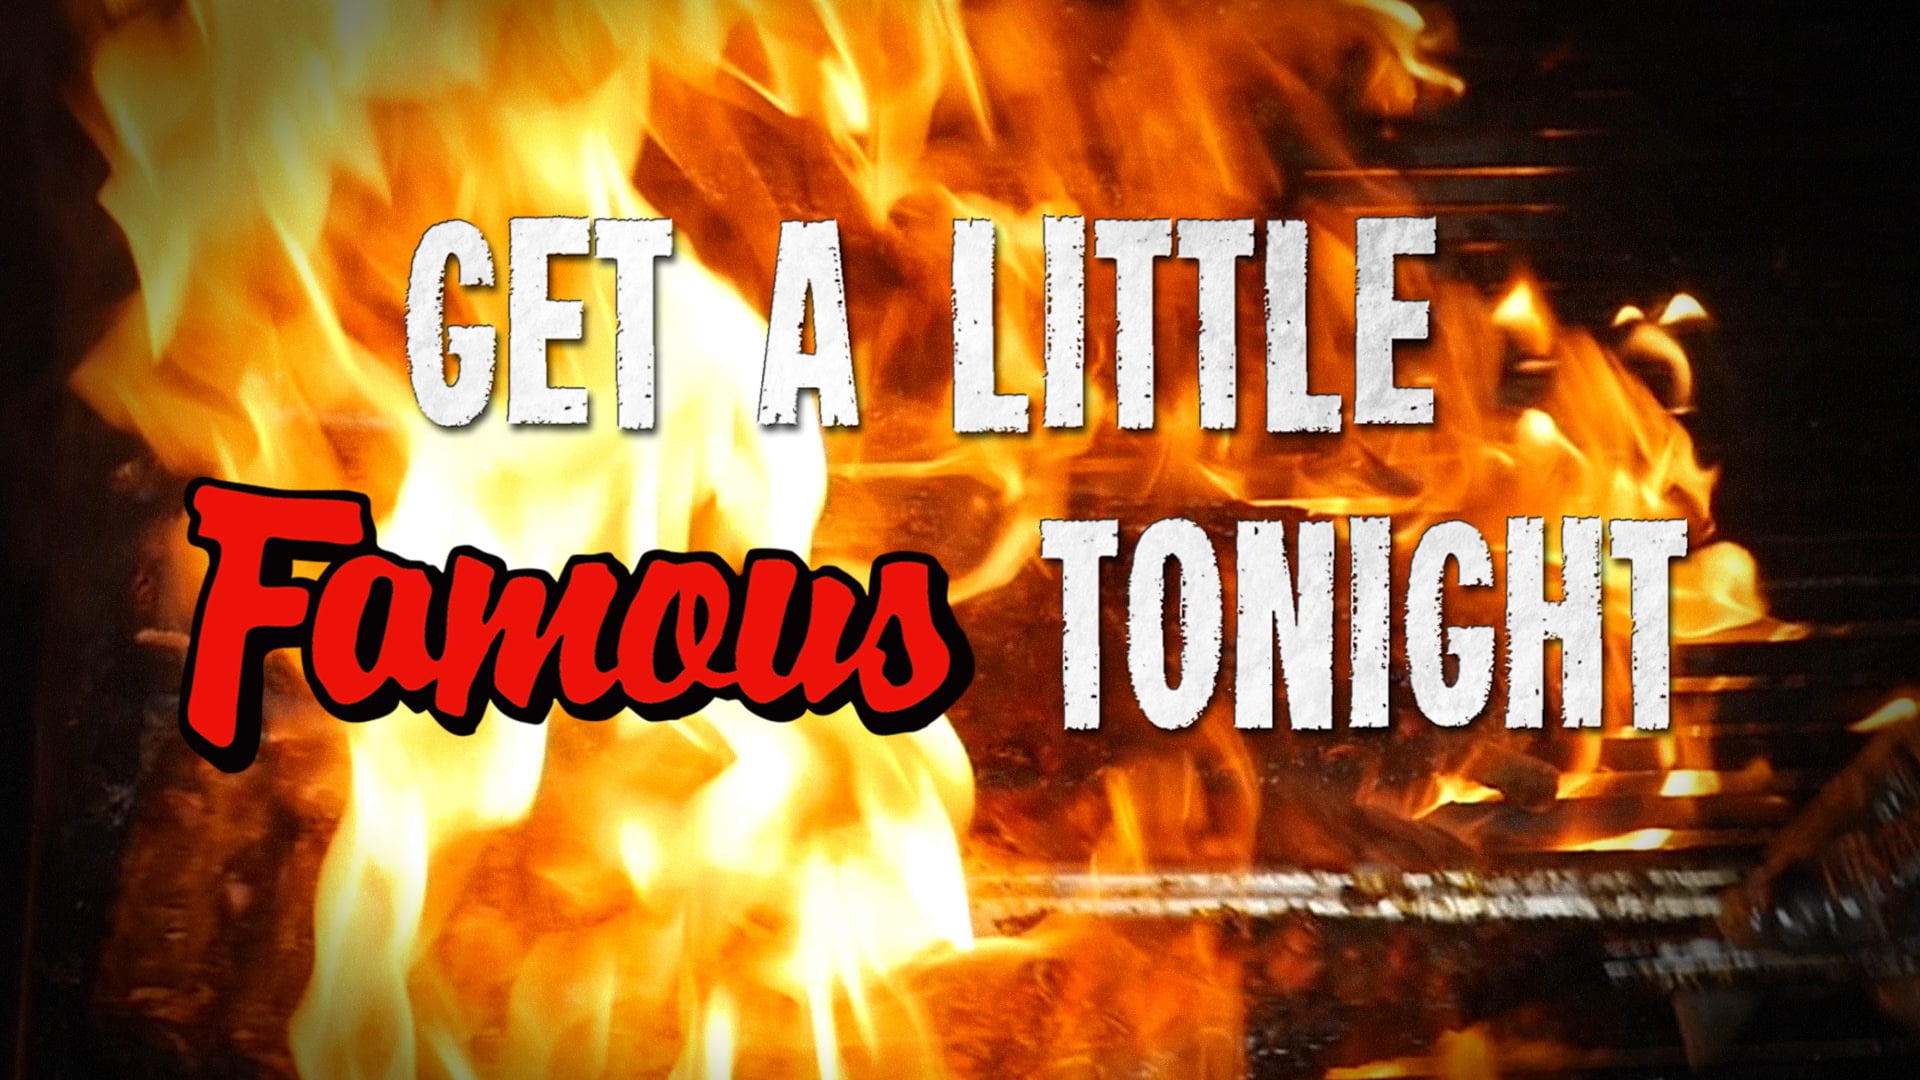 Famous Daves - Get a Little Famous Tonight